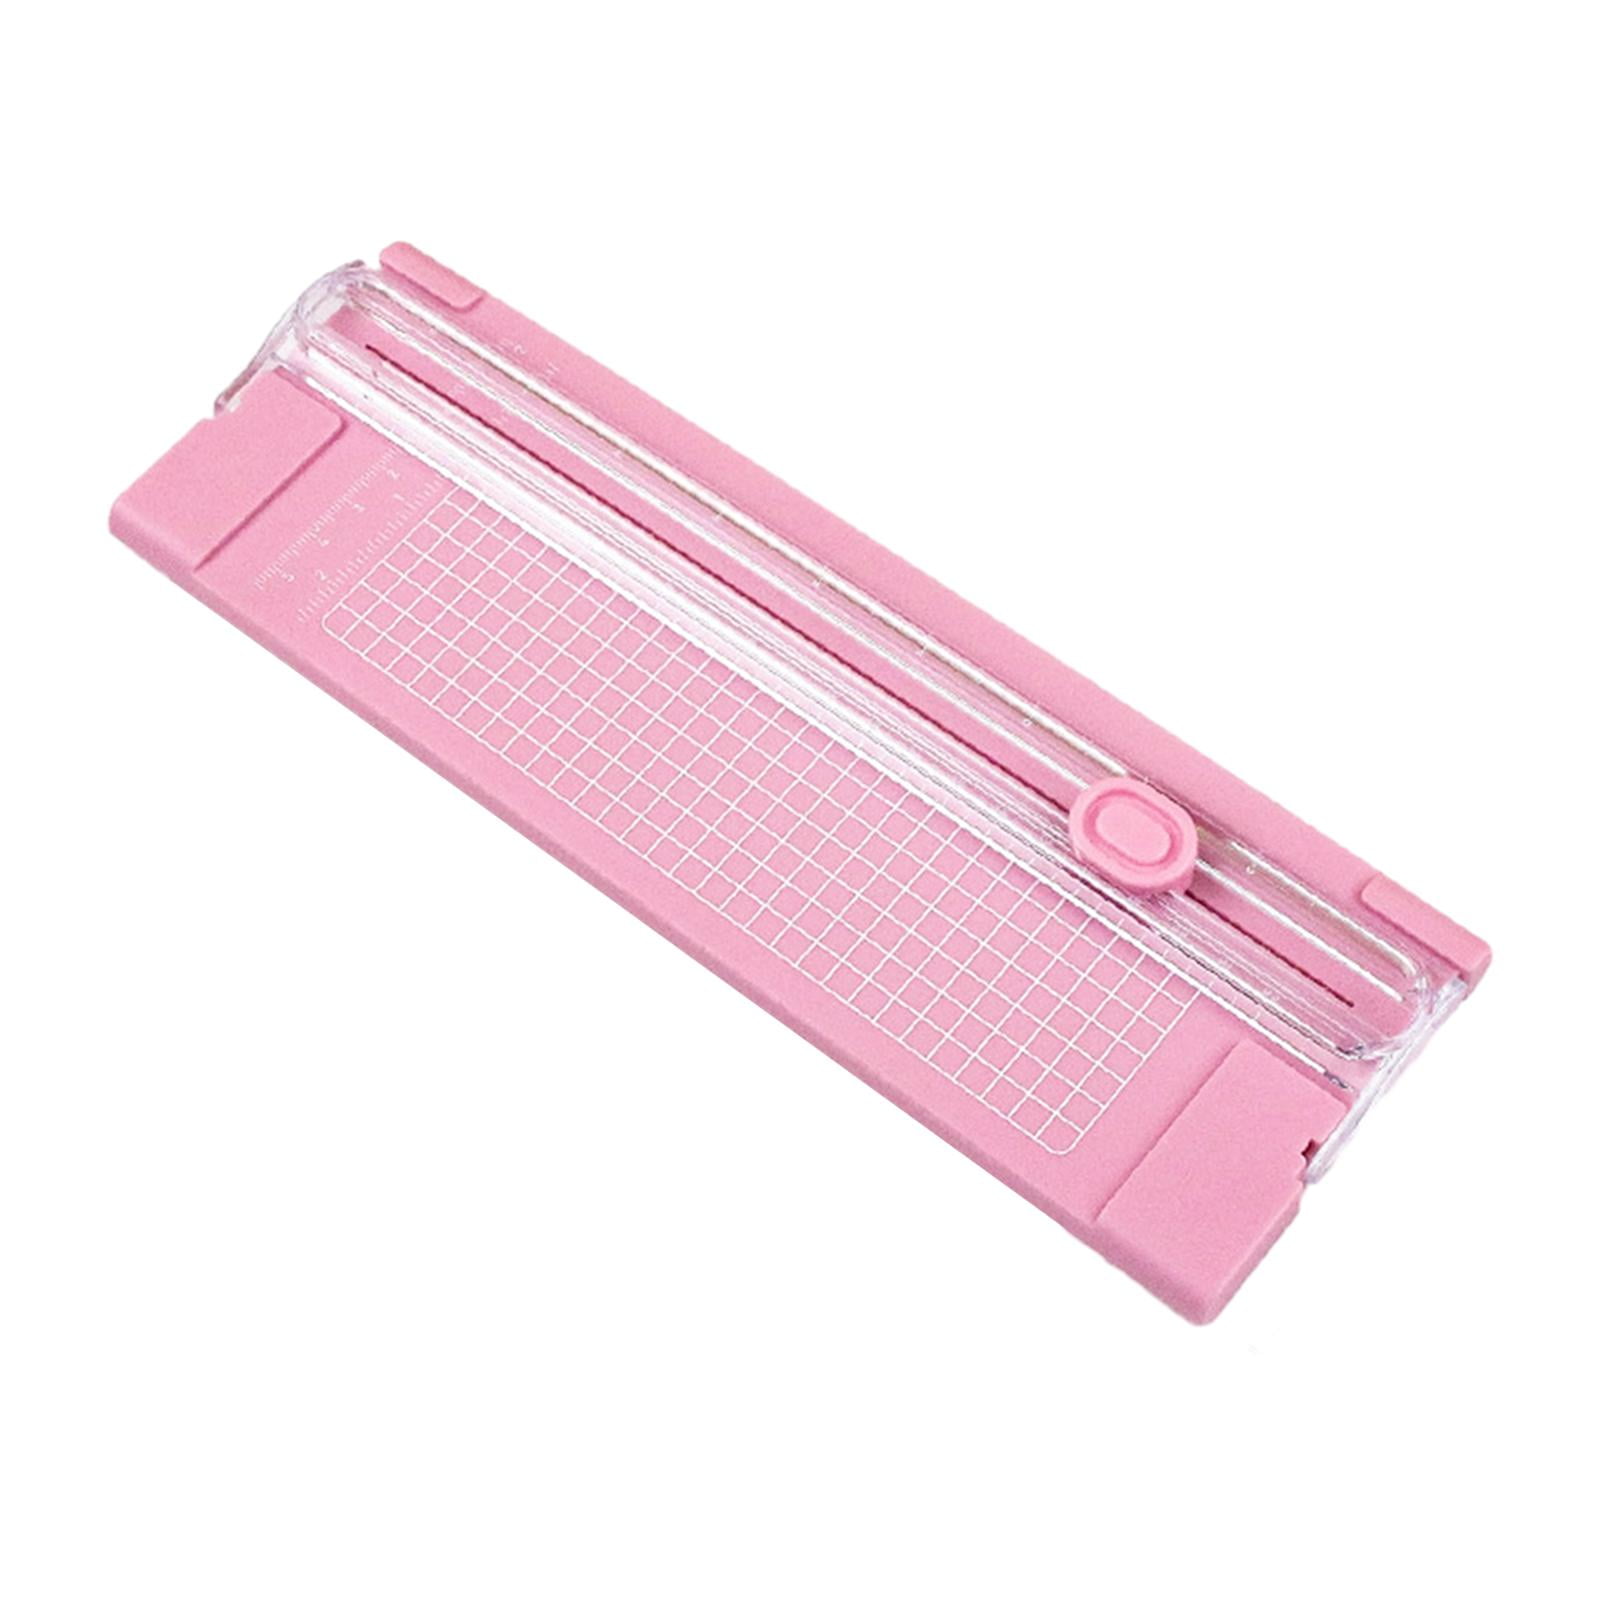 A4 Paper Cutter Photo Trimmer Durable Side Ruler Crafts Paper Cutting  Machine Lightweight Mini for Office Home Stationery Paper Coupon Blue 